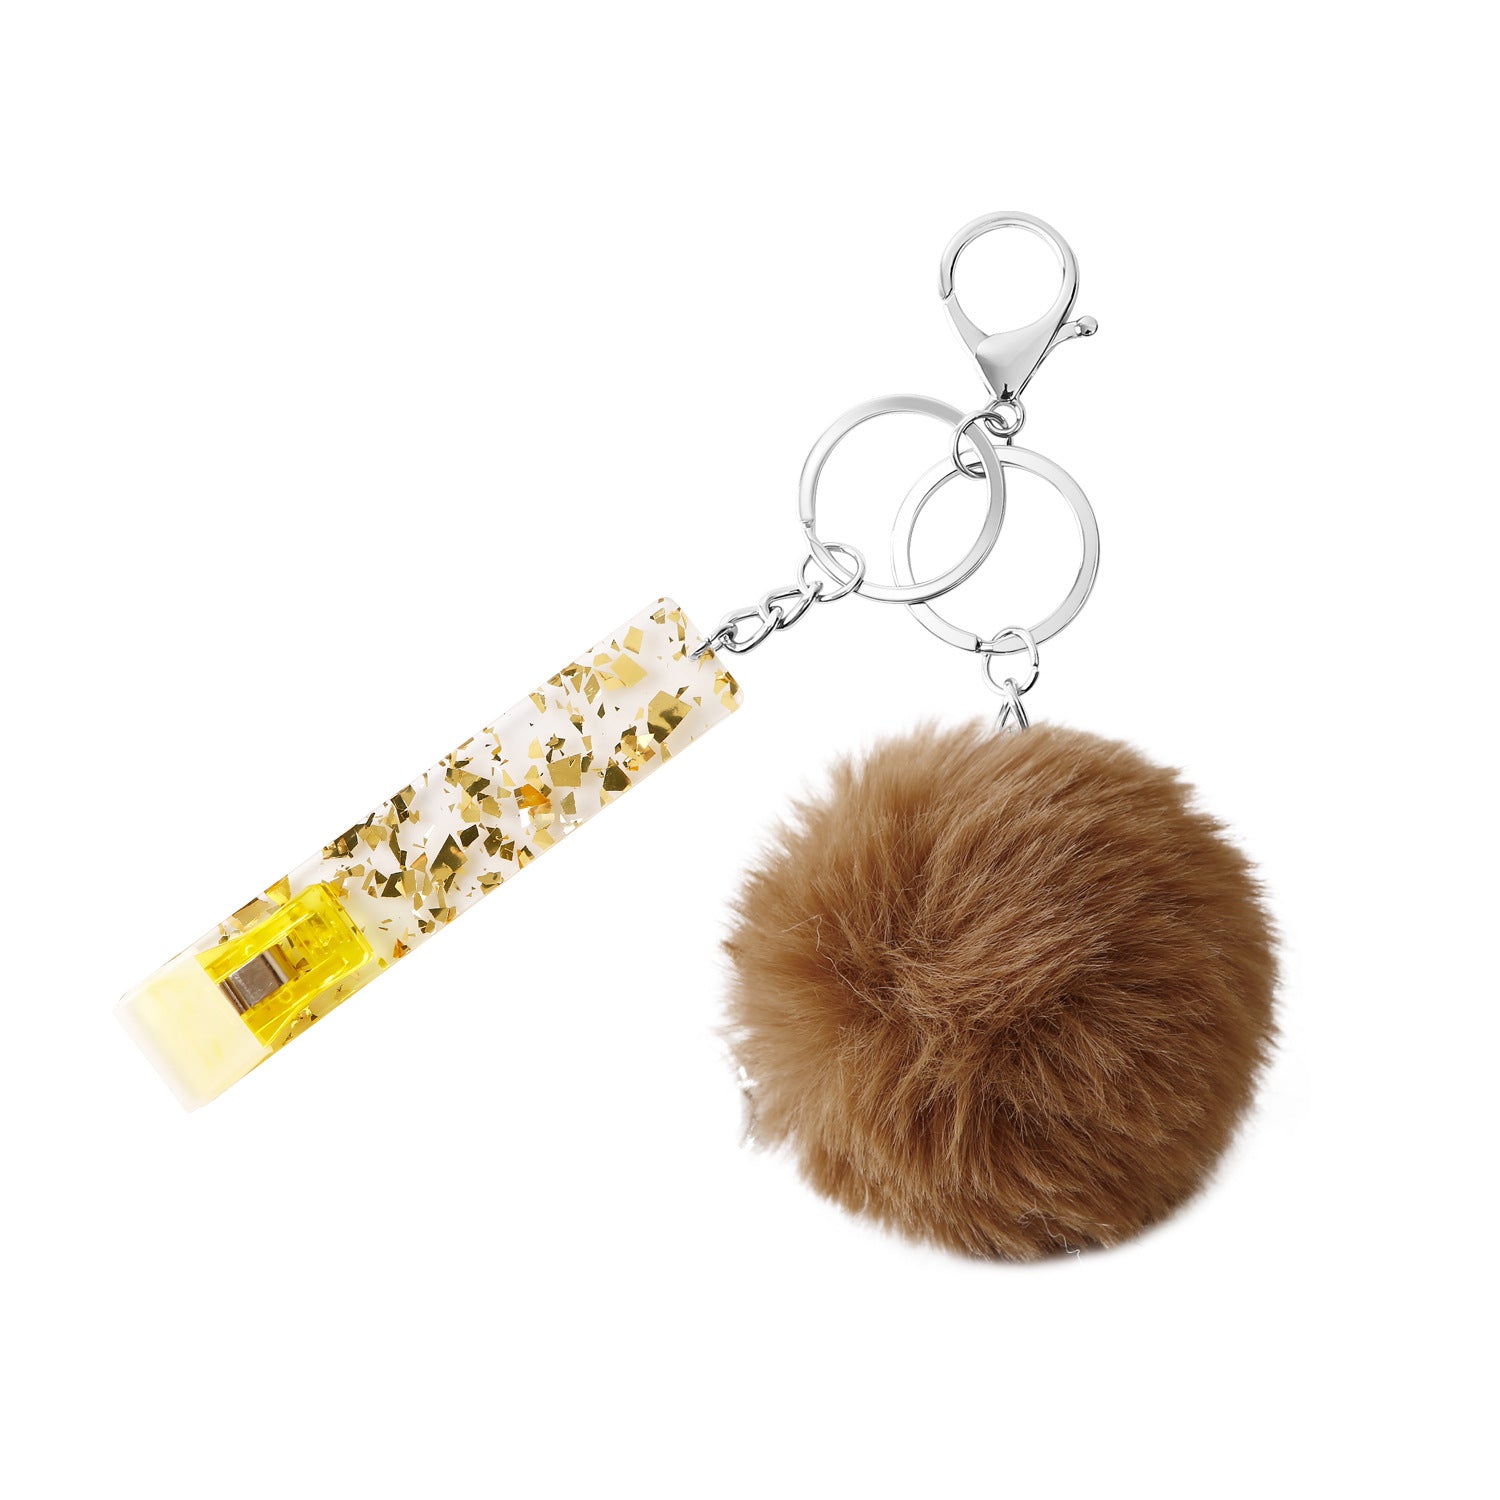 Wholesale Contactless ATM Card Taker Acrylic Fur Ball Keychain